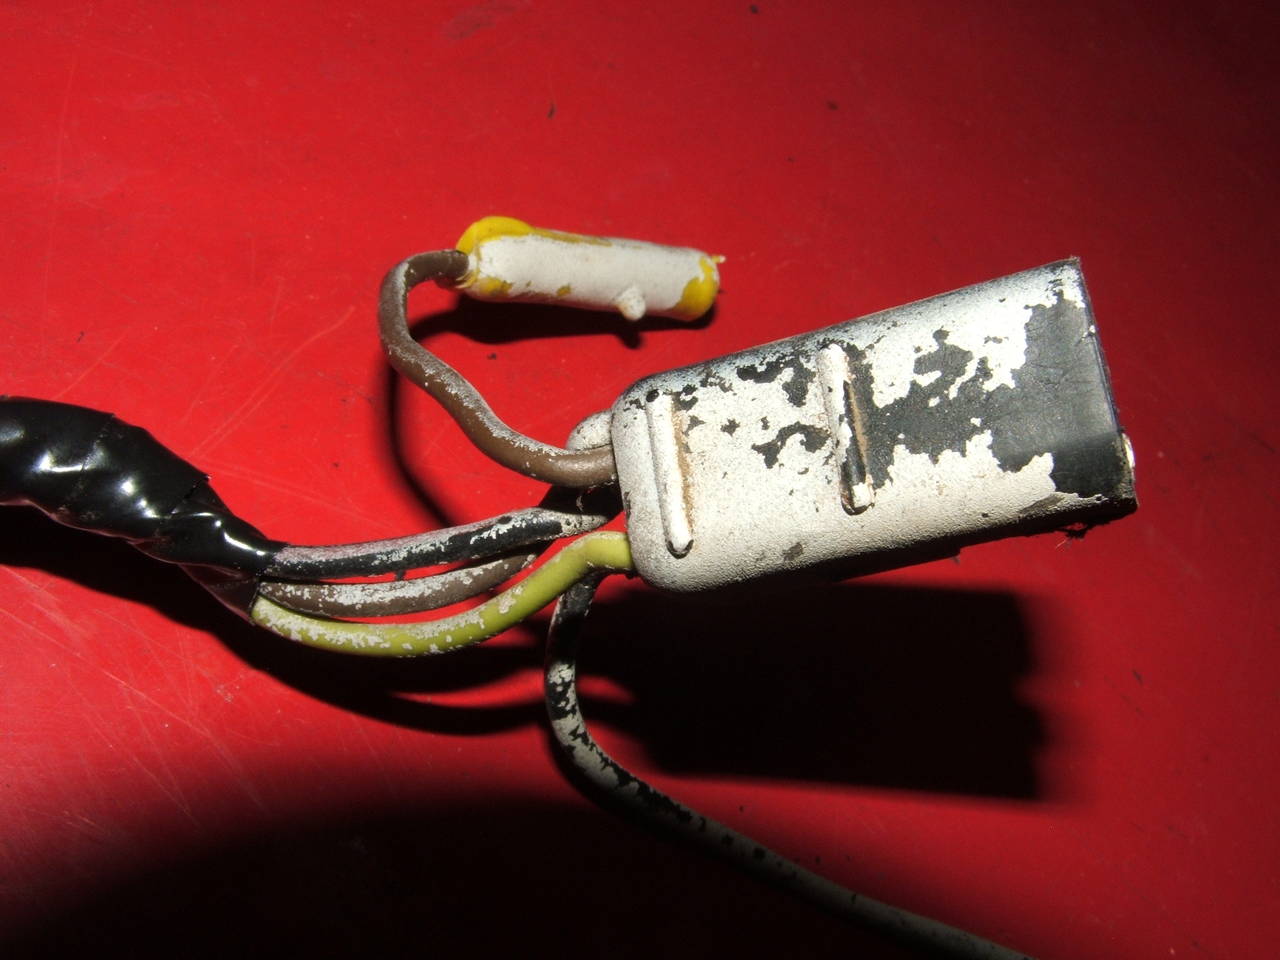 taillight harness connector